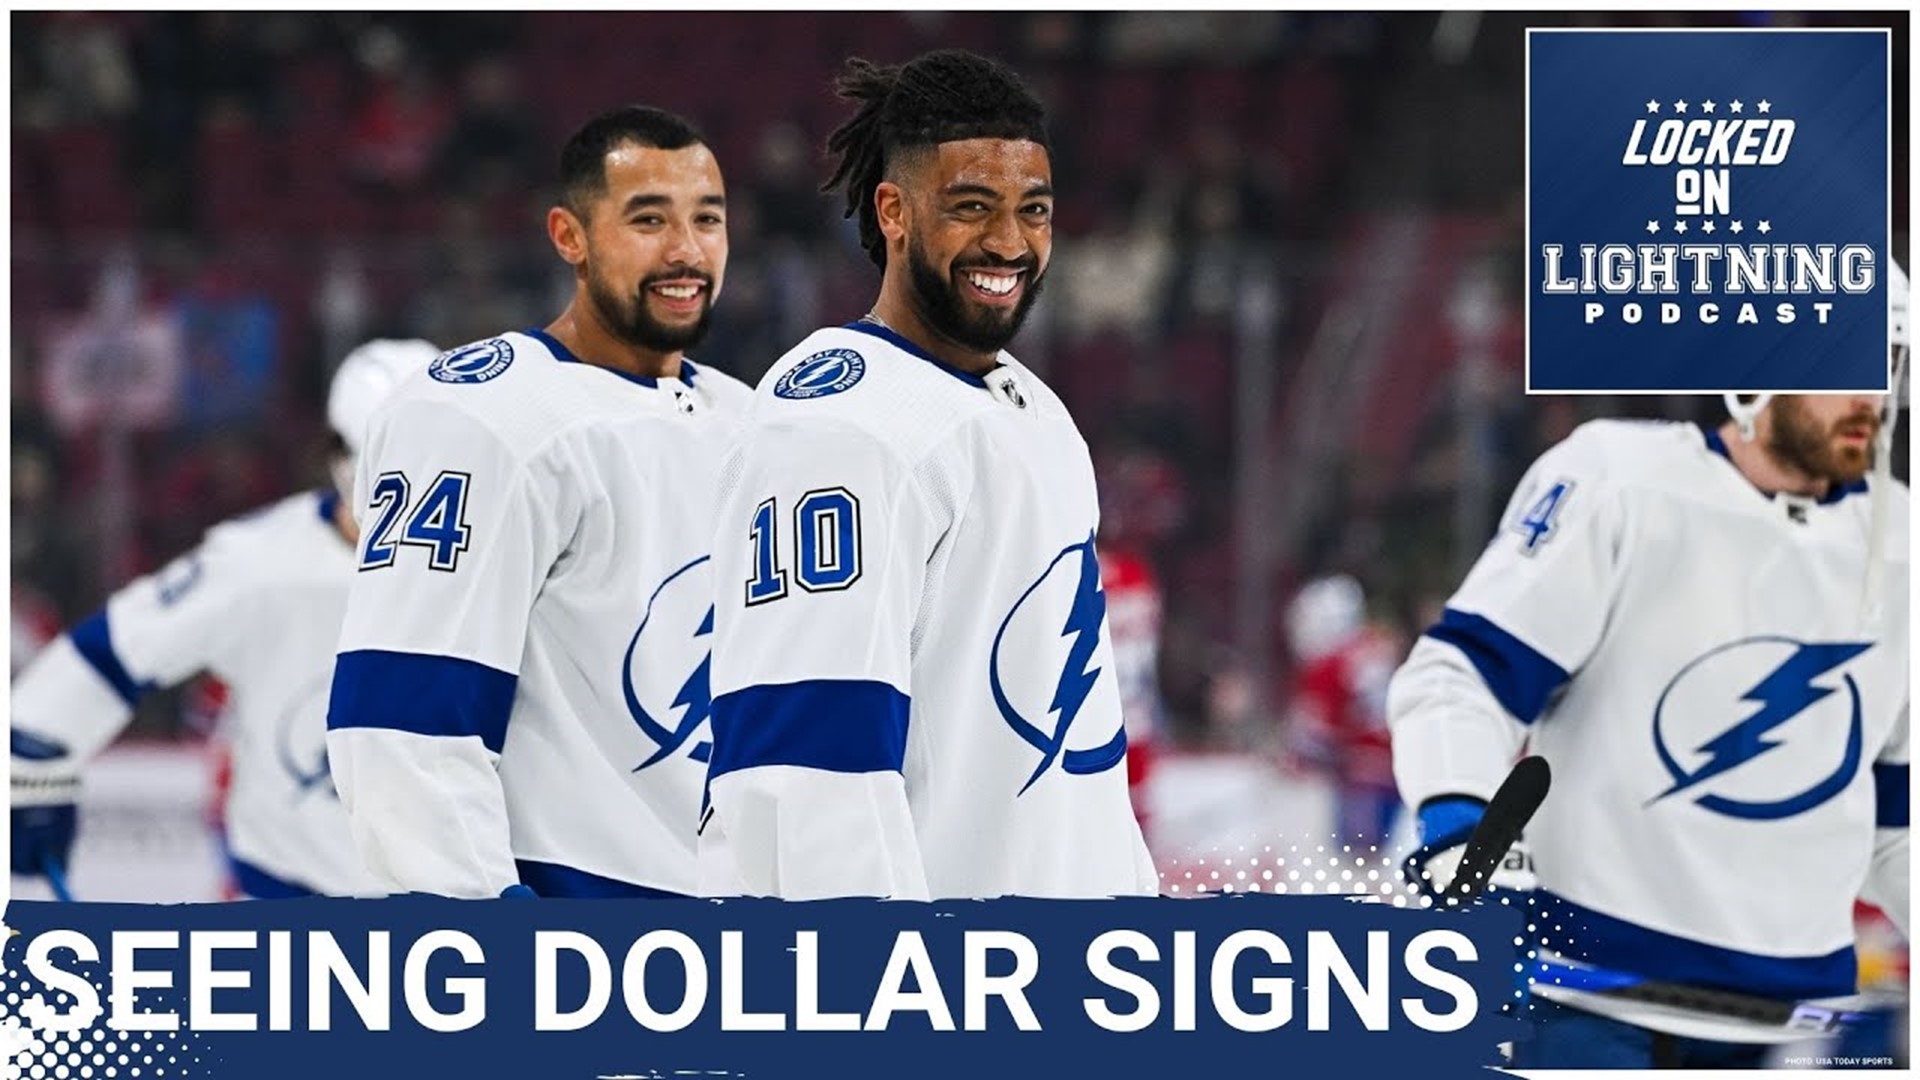 With the Lightning in action tonight against the Senators, we reflect on the month since the Trade Deadline.